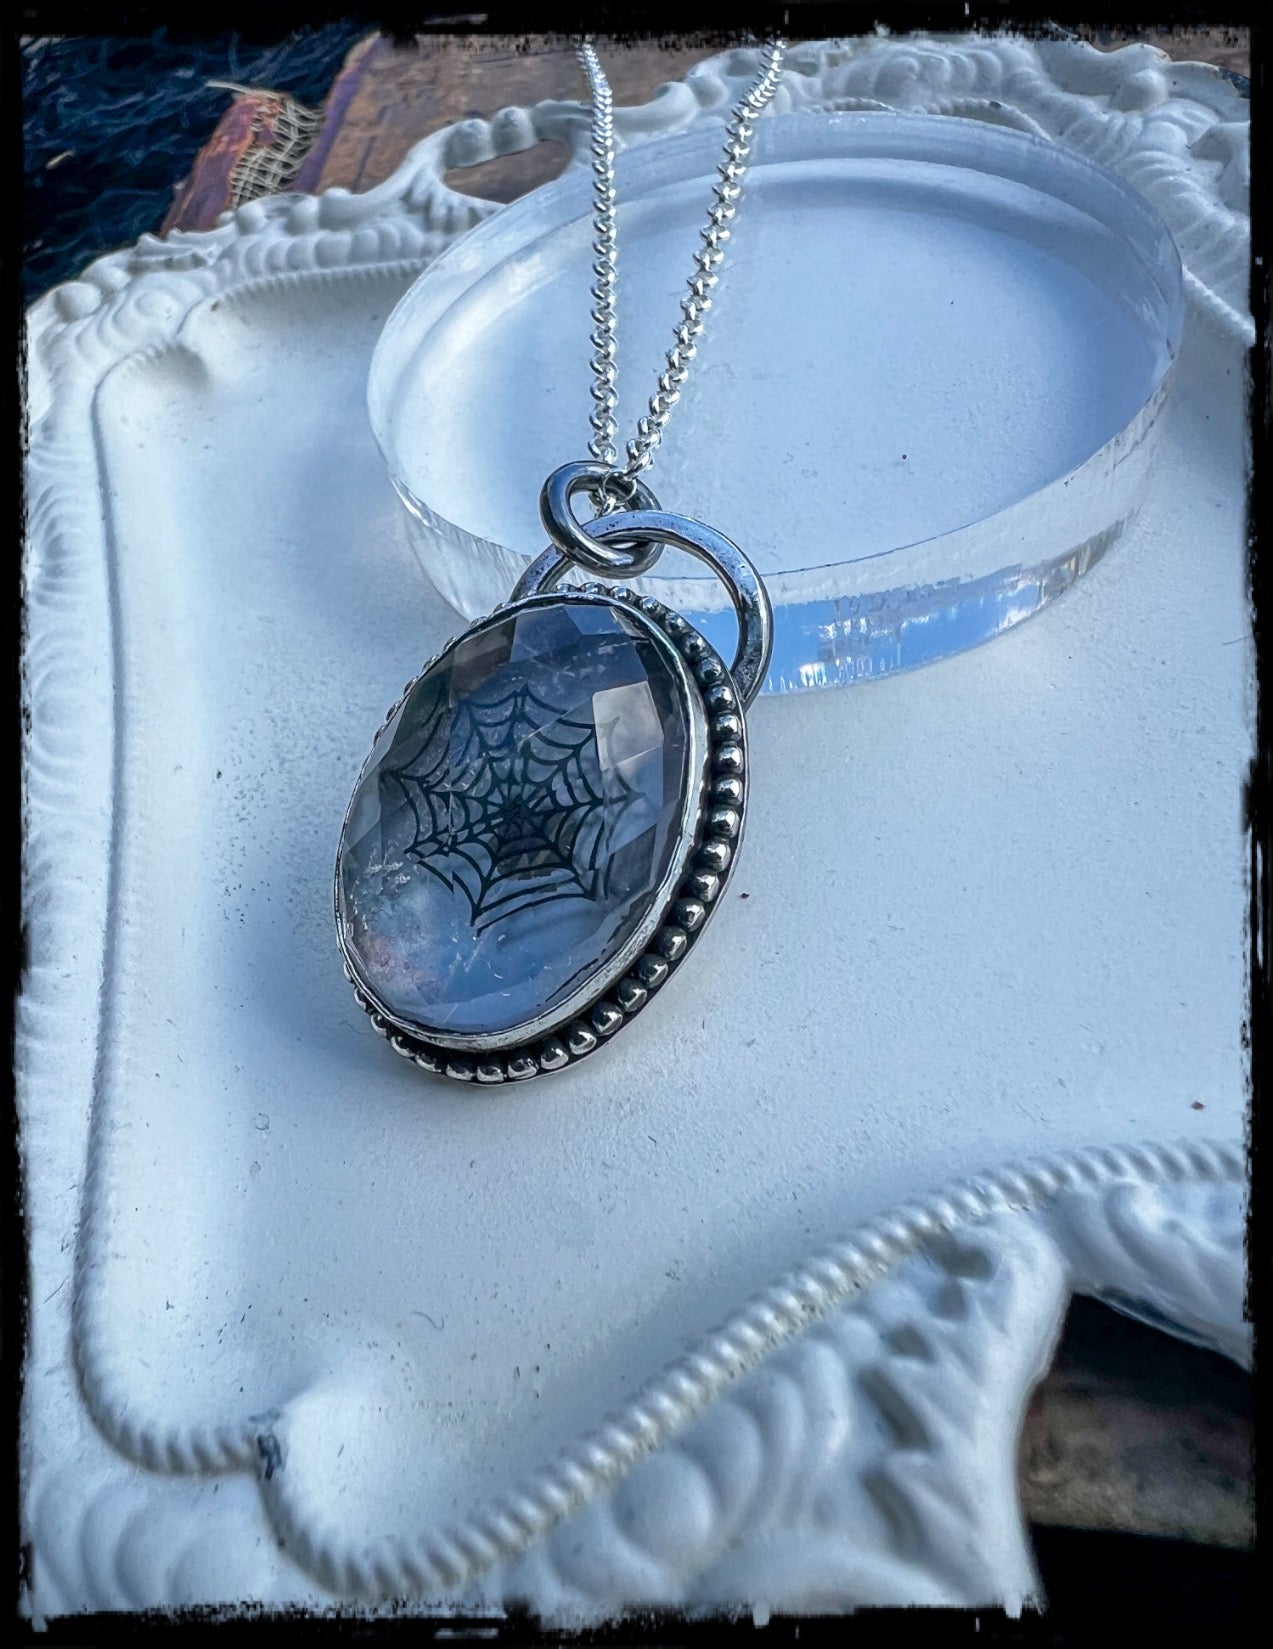 Handcrafted sterling and fine silver rose cut Himalayan quartz doublet with encased spiderweb etching pendant necklace ~